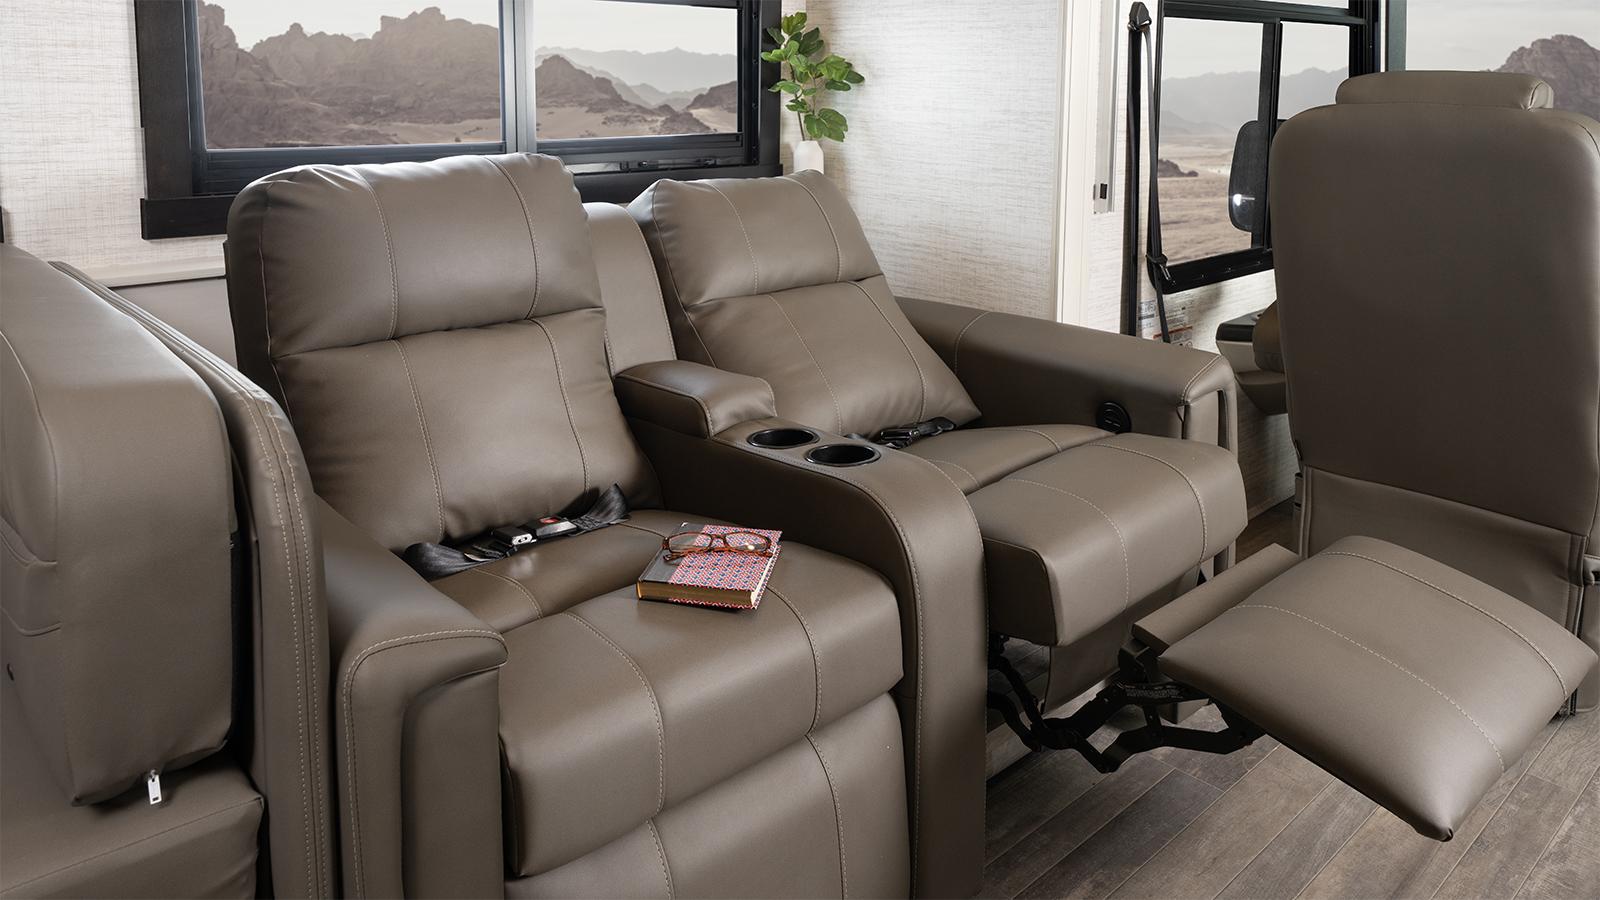 Precept 34G Power Theater Seating